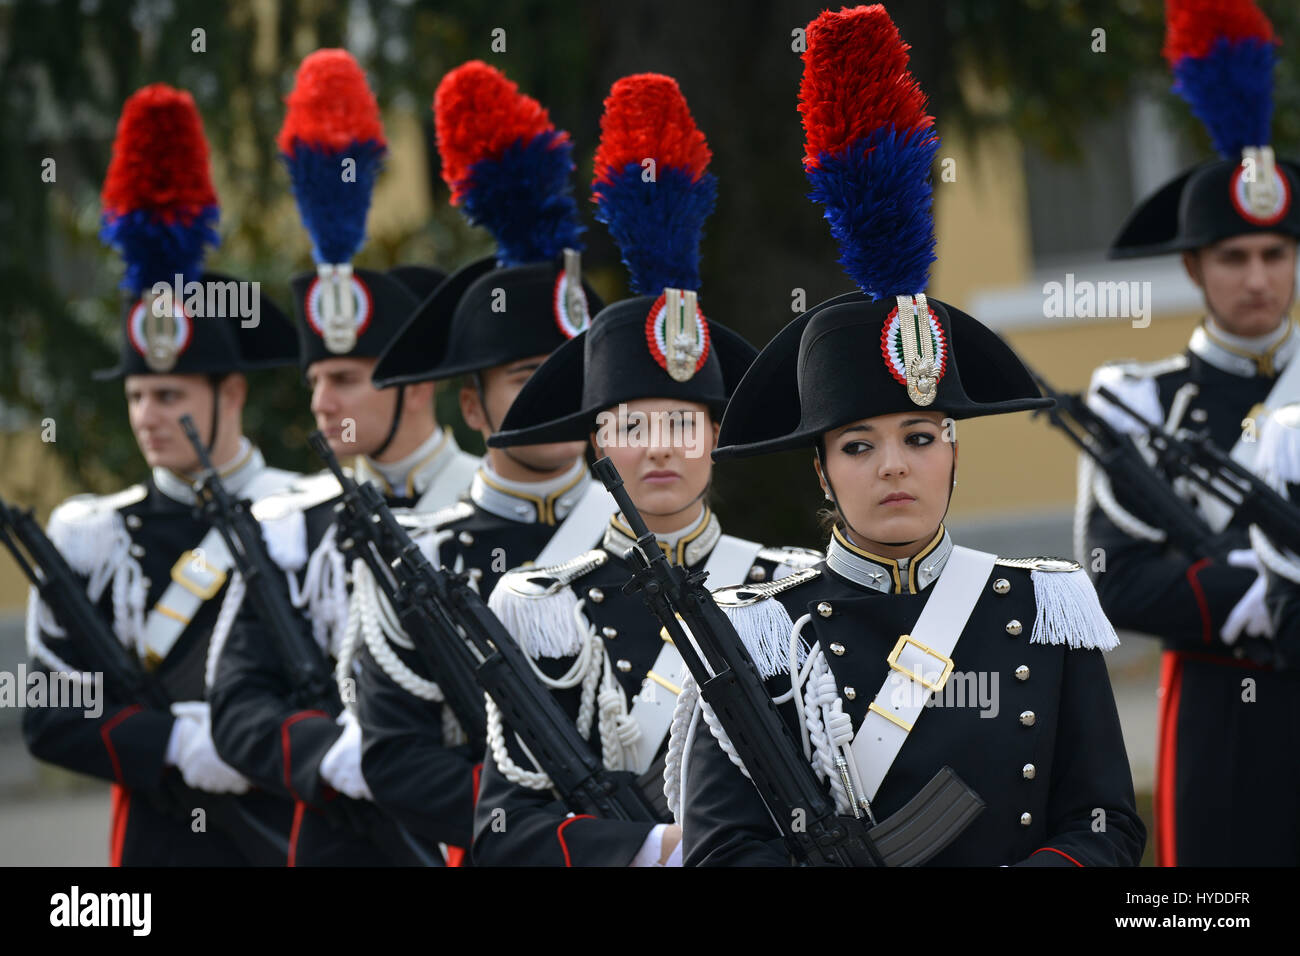 Carabinieri police in dress uniforms stand at attention at the Center of Excellence for Stability Police Units April 1, 2017 in Vicenza, Italy. The center is a train the trainer school developed by the Carabinieri for peace-keeping missions around the world. Stock Photo